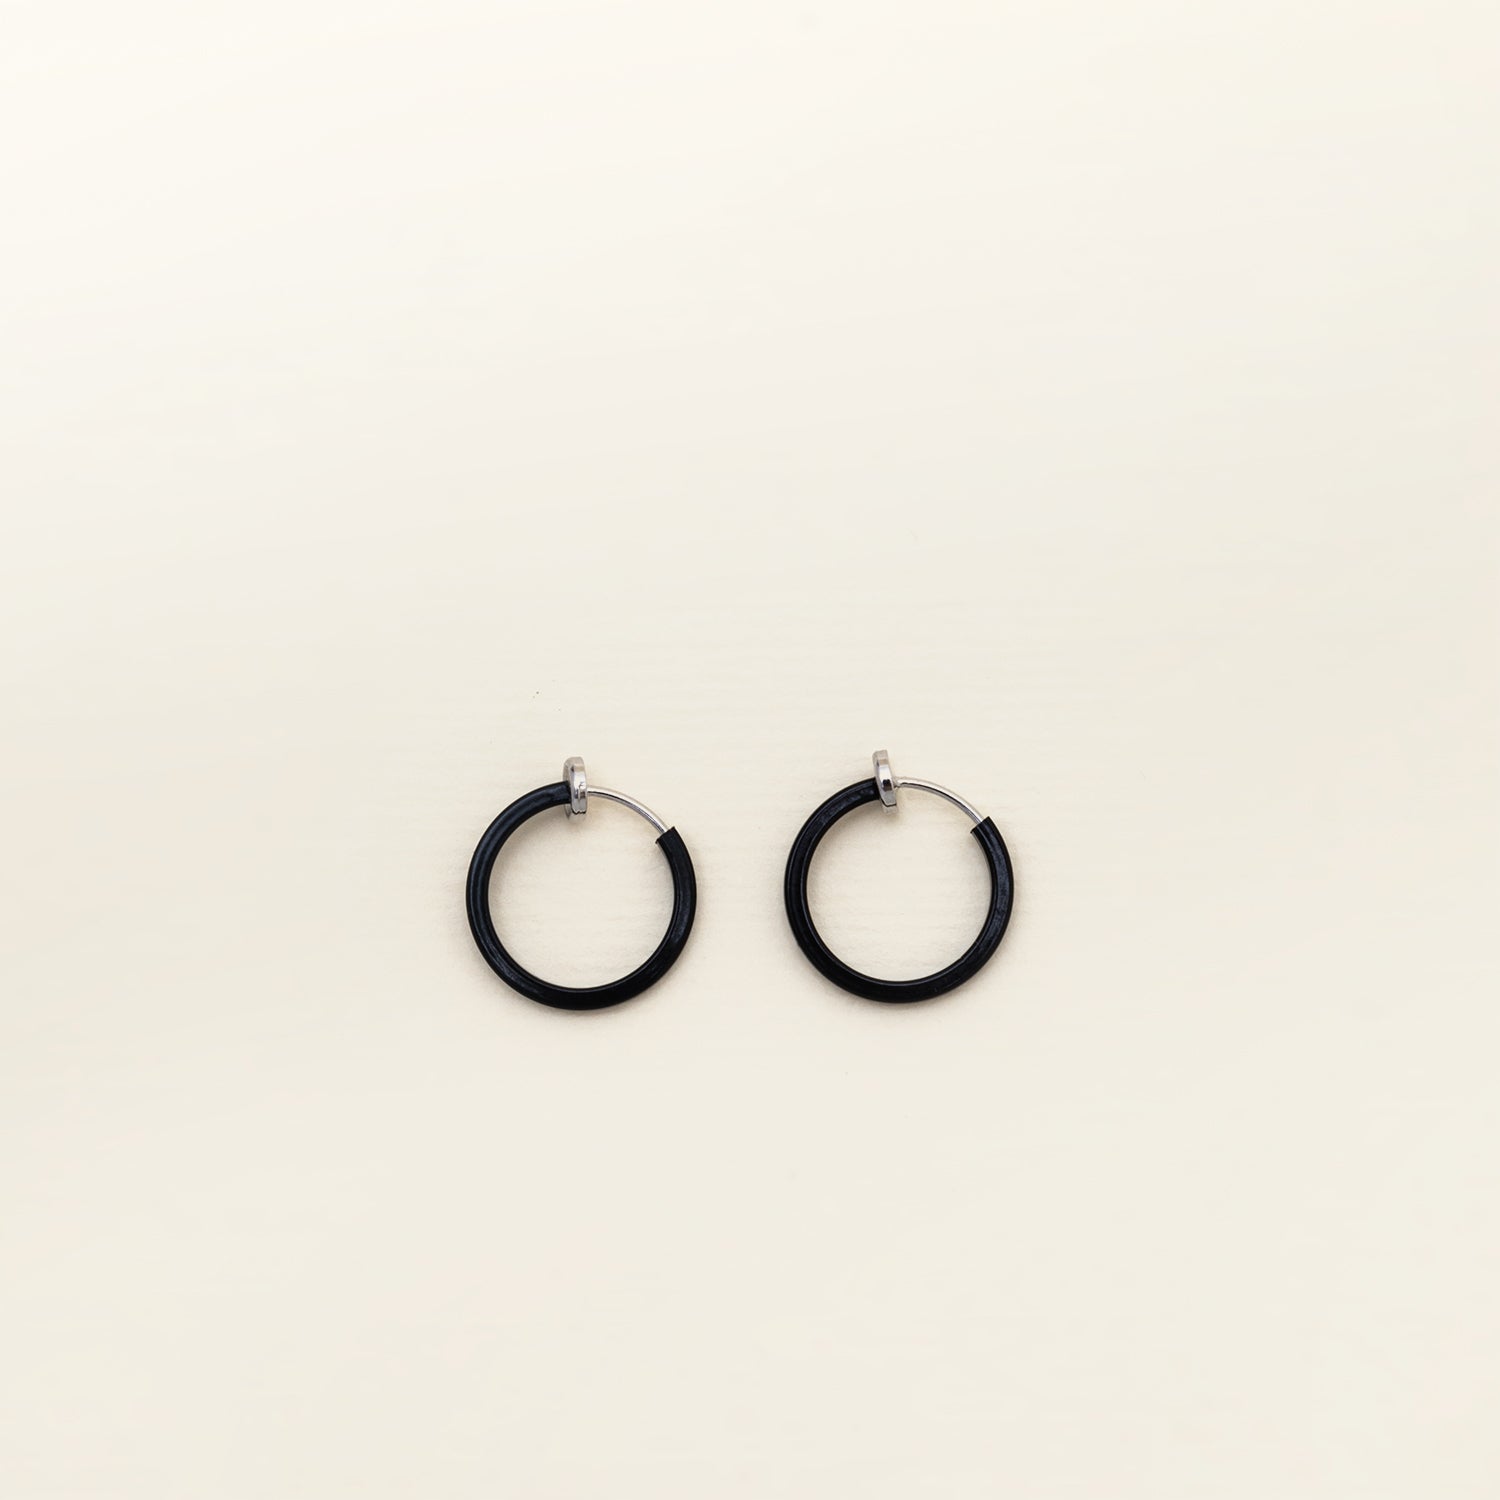 Image of the Mini Hoop Clip-On Earrings feature a sliding spring closure and are best suited for those with smaller or thinner ear lobes. On average, each pair can be comfortably worn for up to 4 hours, and provide a very secure hold that automatically adjusts to the ear thickness for a perfect fit. Crafted with stainless steel, each pair is sold individually.